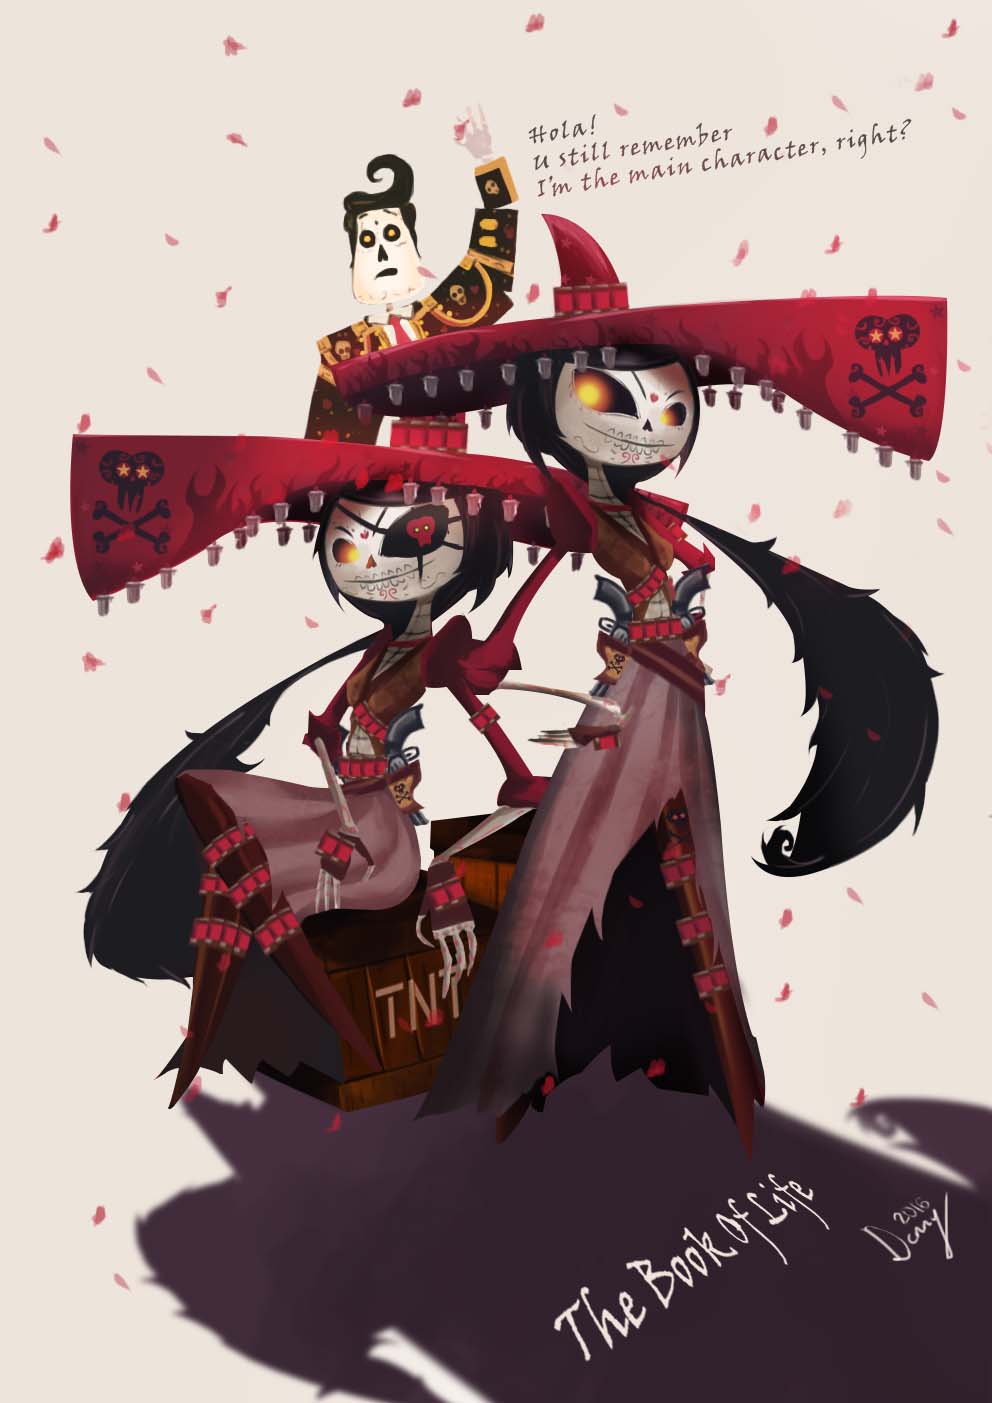 The Book Of Life Sanchez Twins By Sheep7465 On DeviantArt.